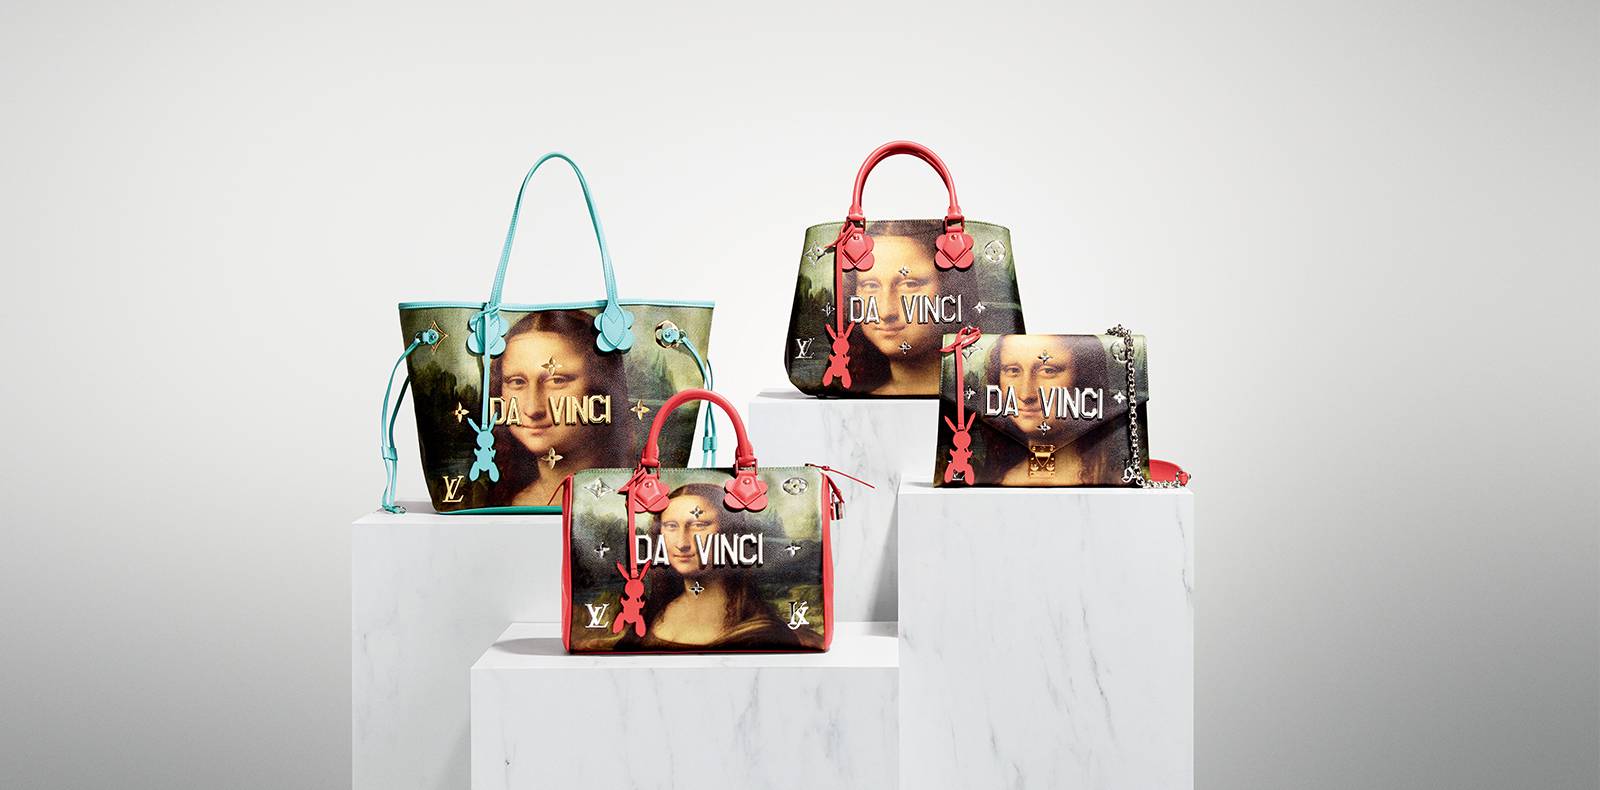 So how does the incredible Louis Vuitton x Jeff Koons collaboration look?